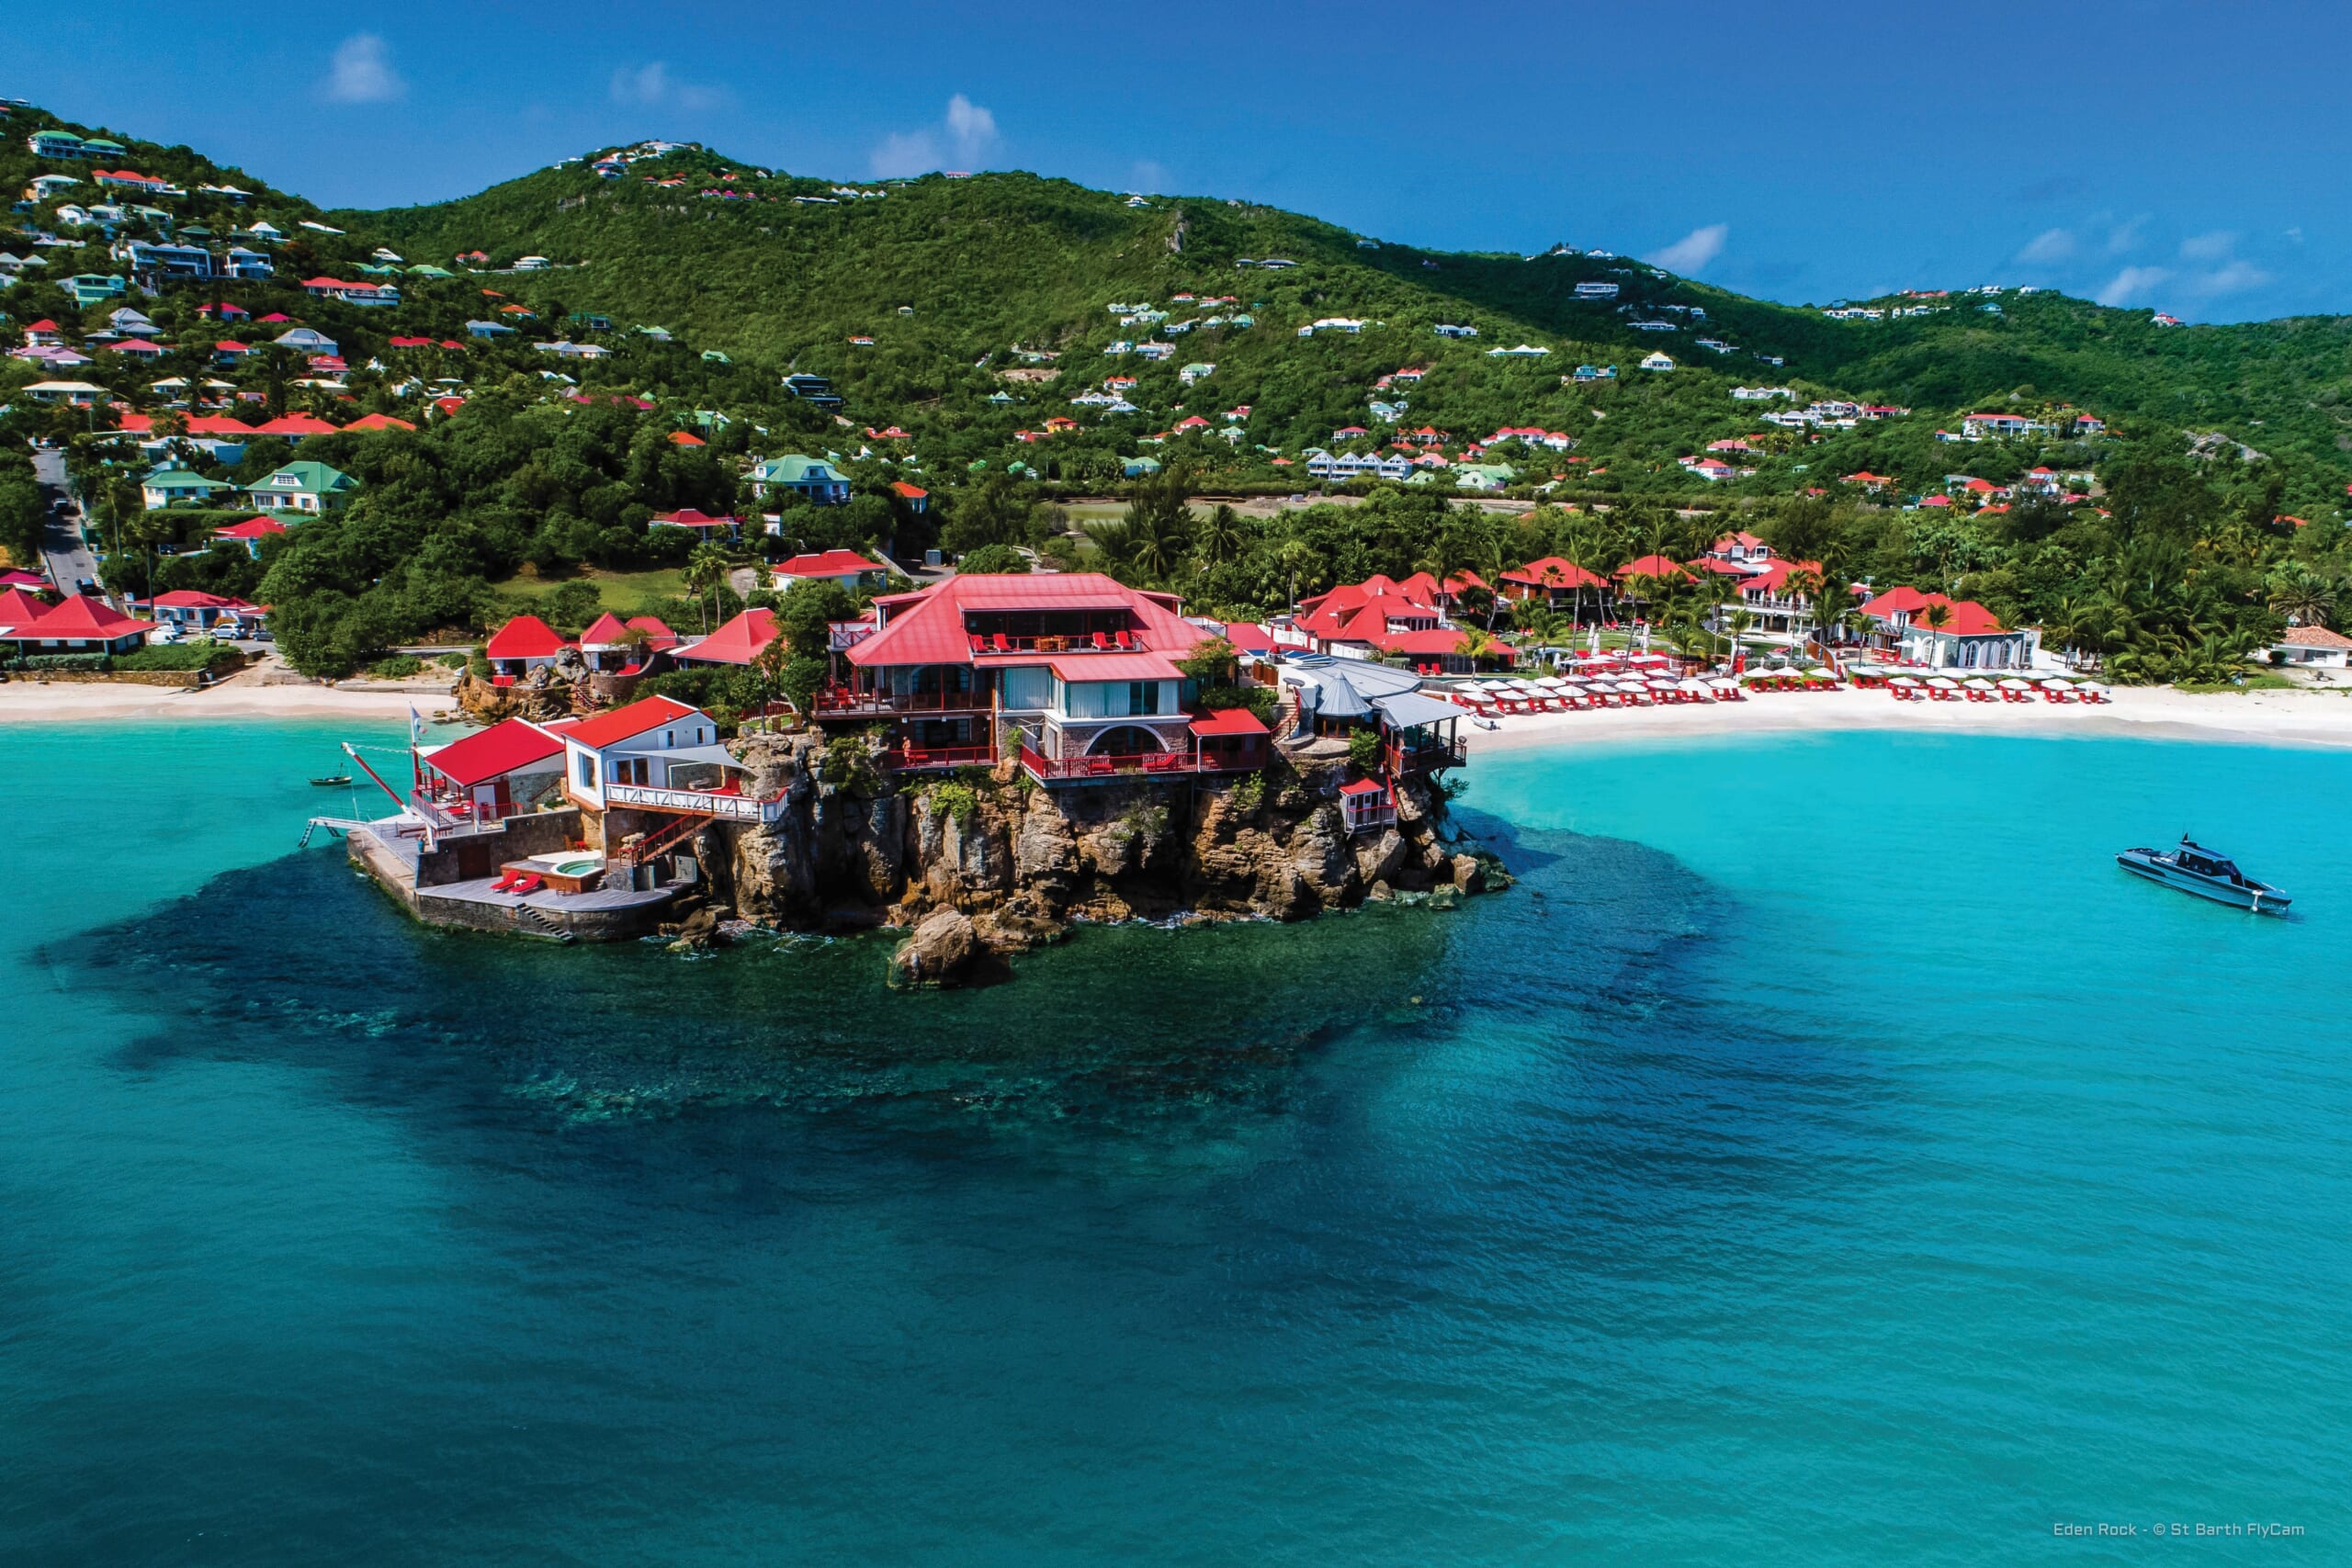 Luxury shopping and designer boutiques in Gustavia, St. Barts